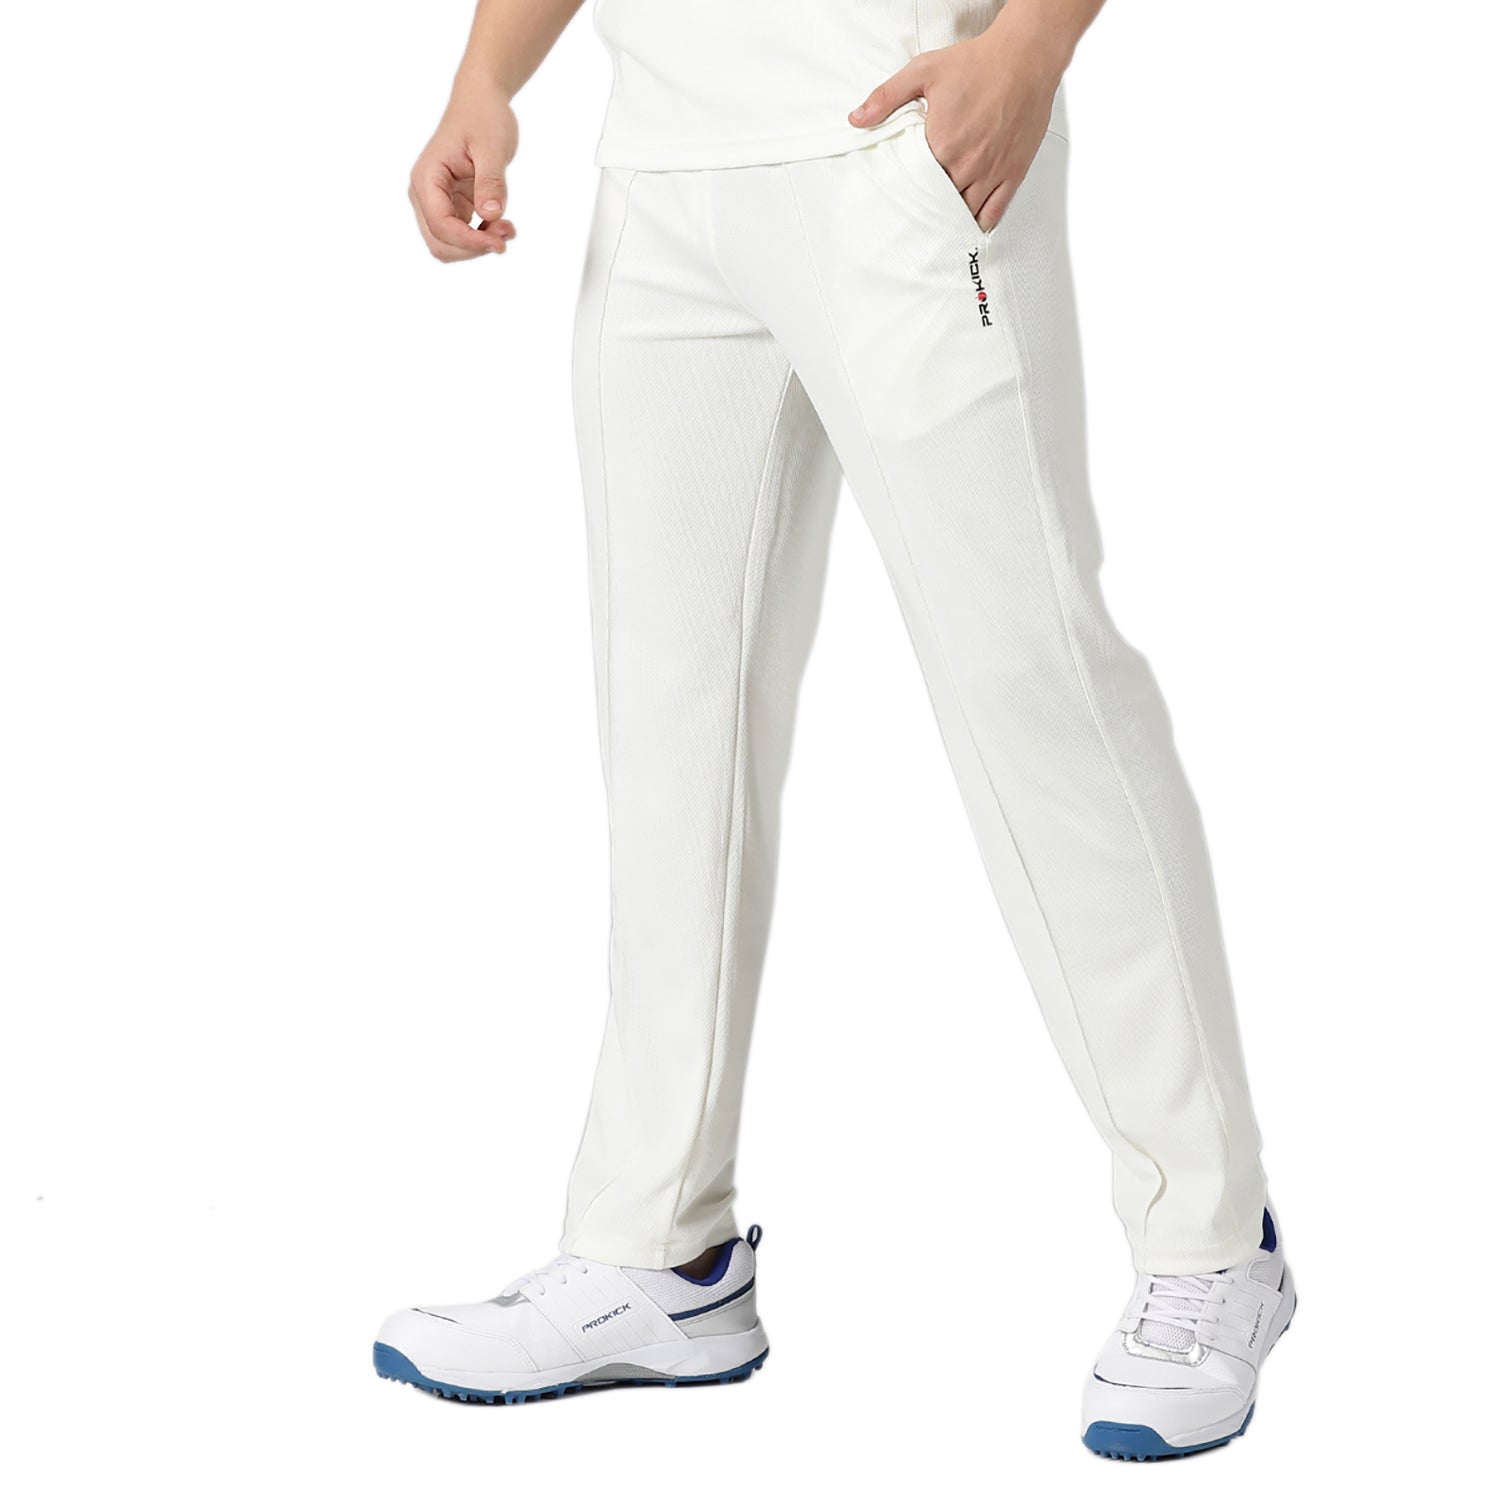 Buy Nike Test Trousers Online India| Nike Cricket Pants Online Store